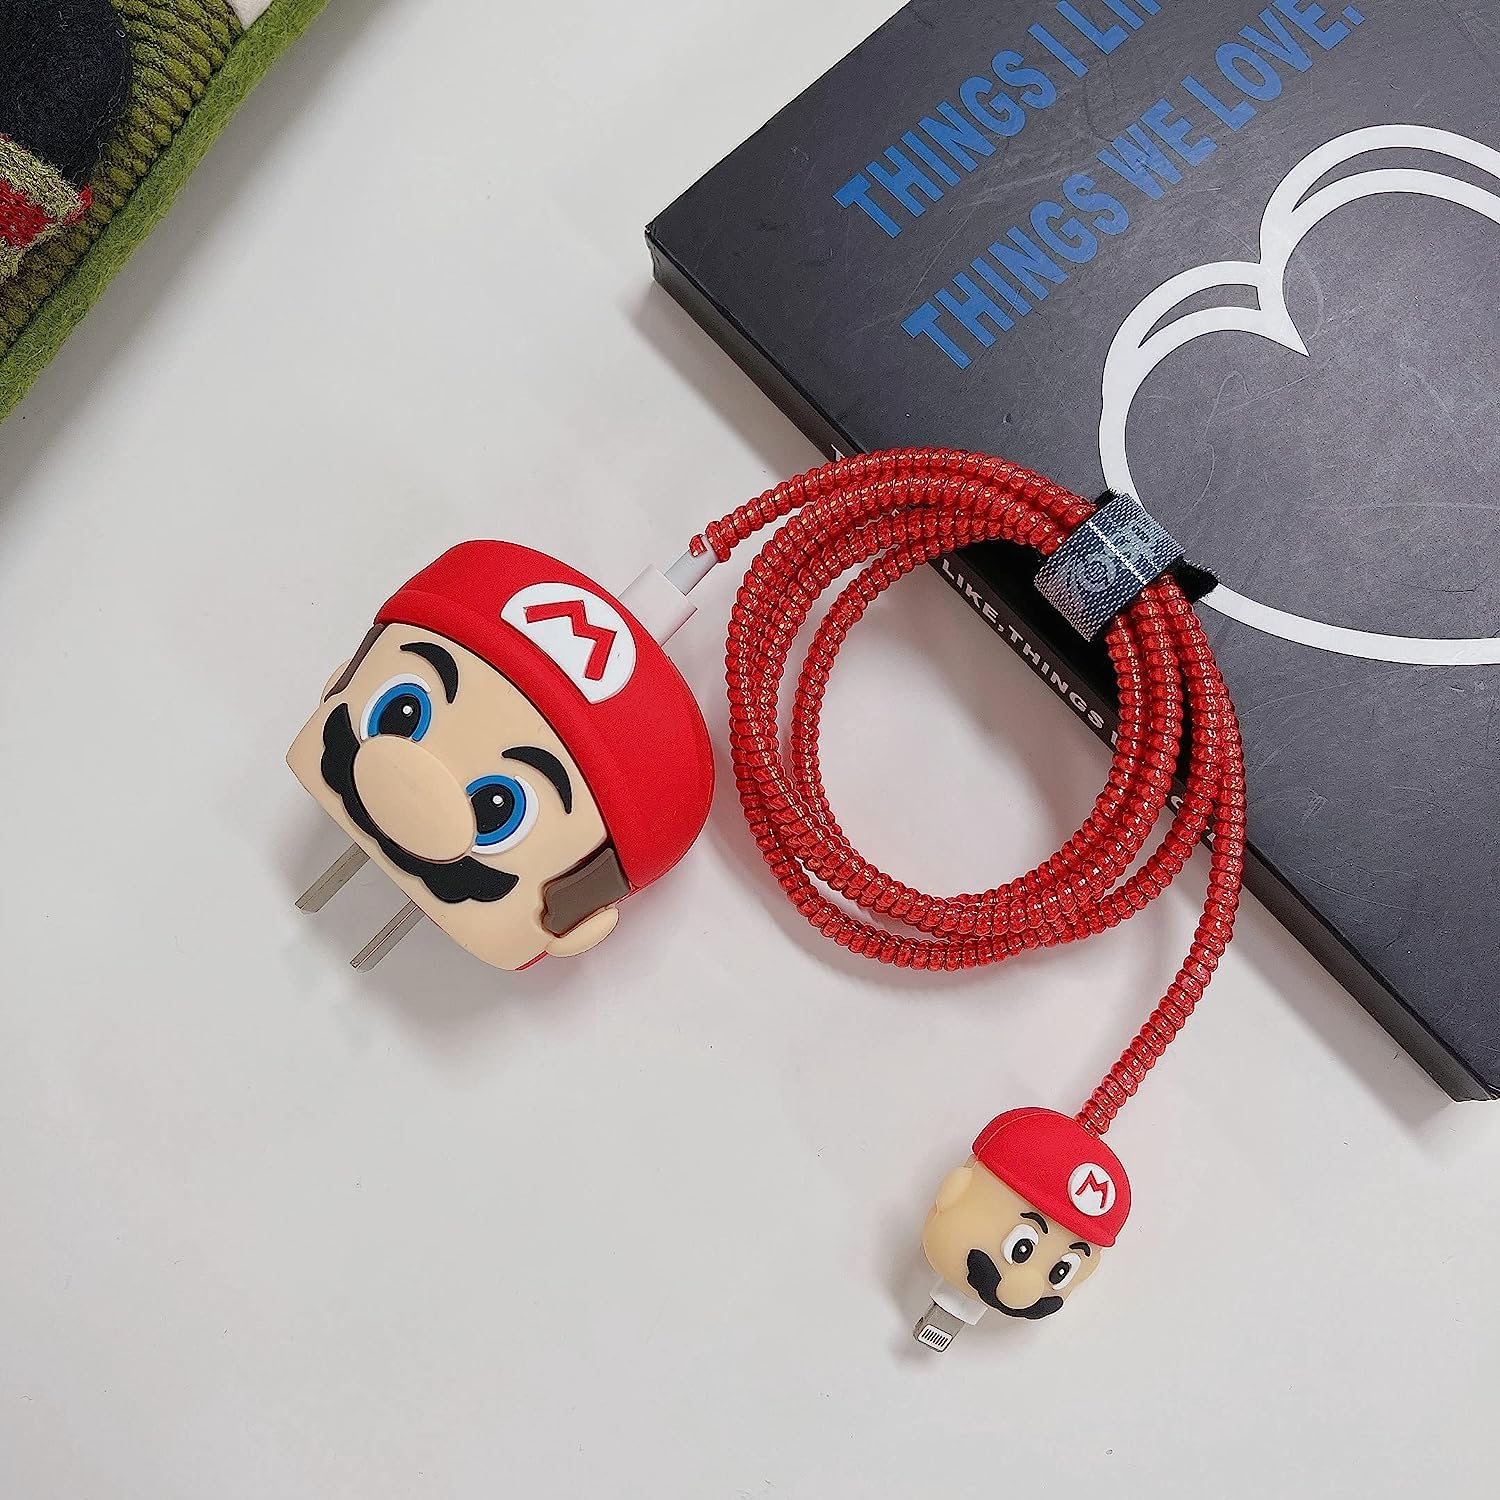 Iphone Charger Case Cover - Super Mario